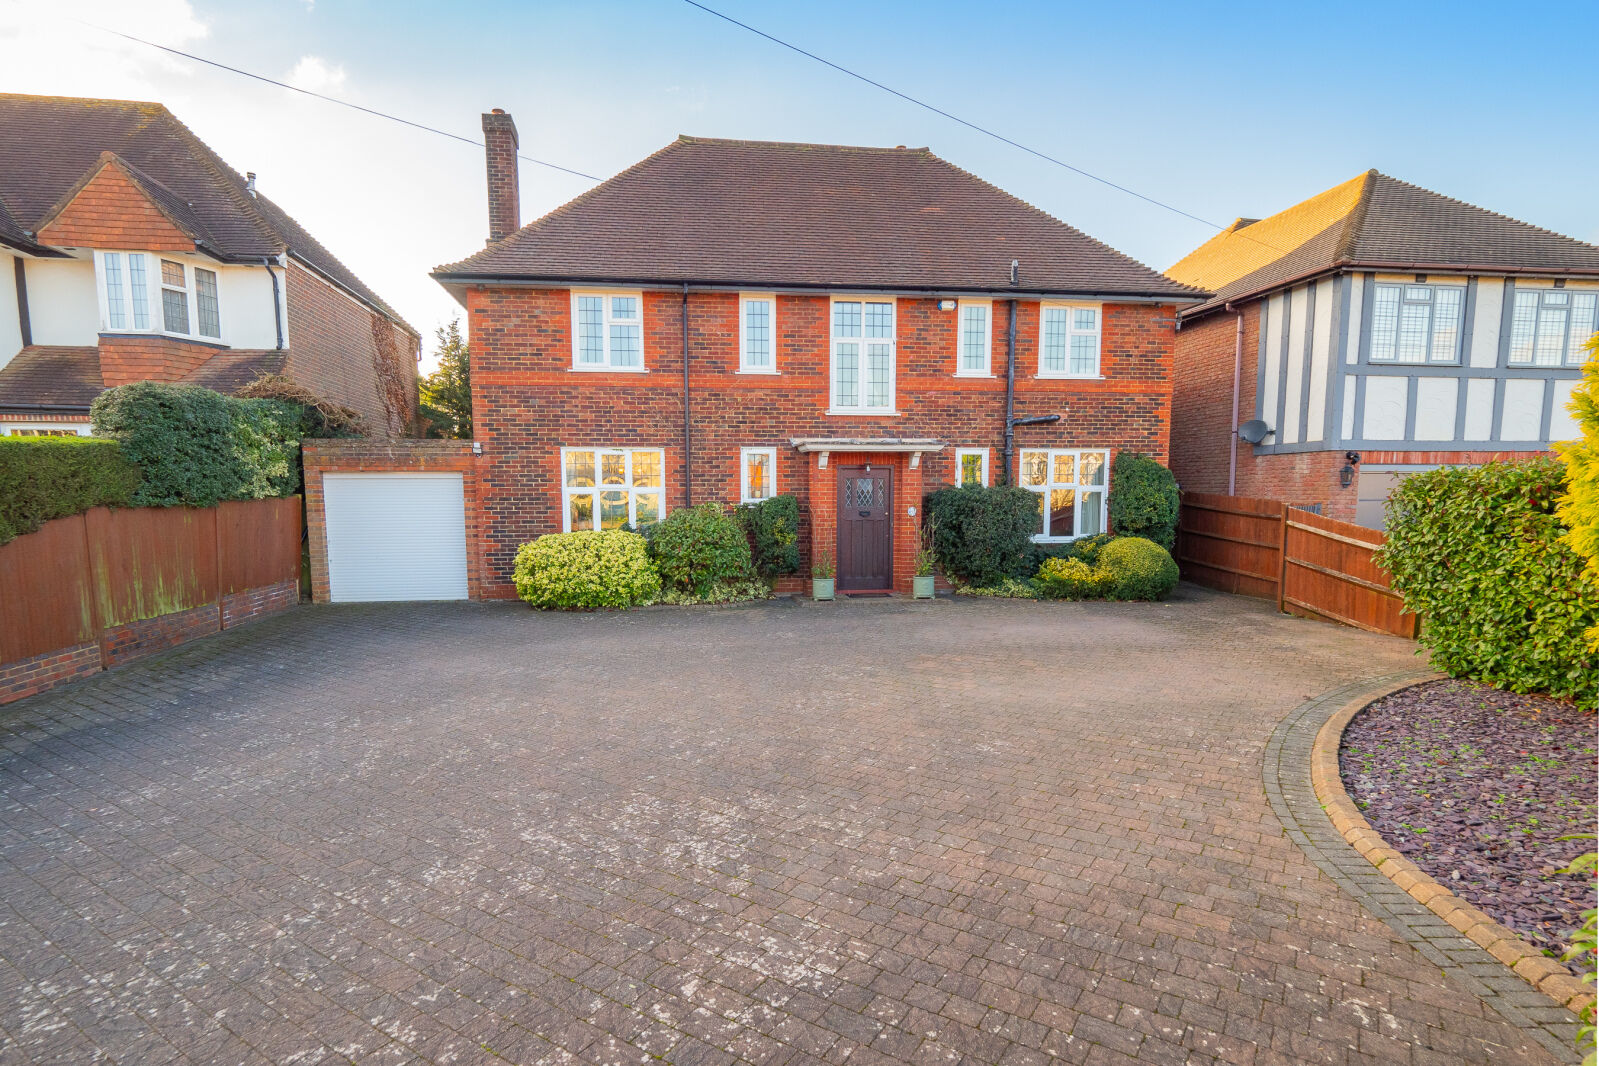 5 bedroom detached house for sale Sandy Lane, Cheam, SM2, main image